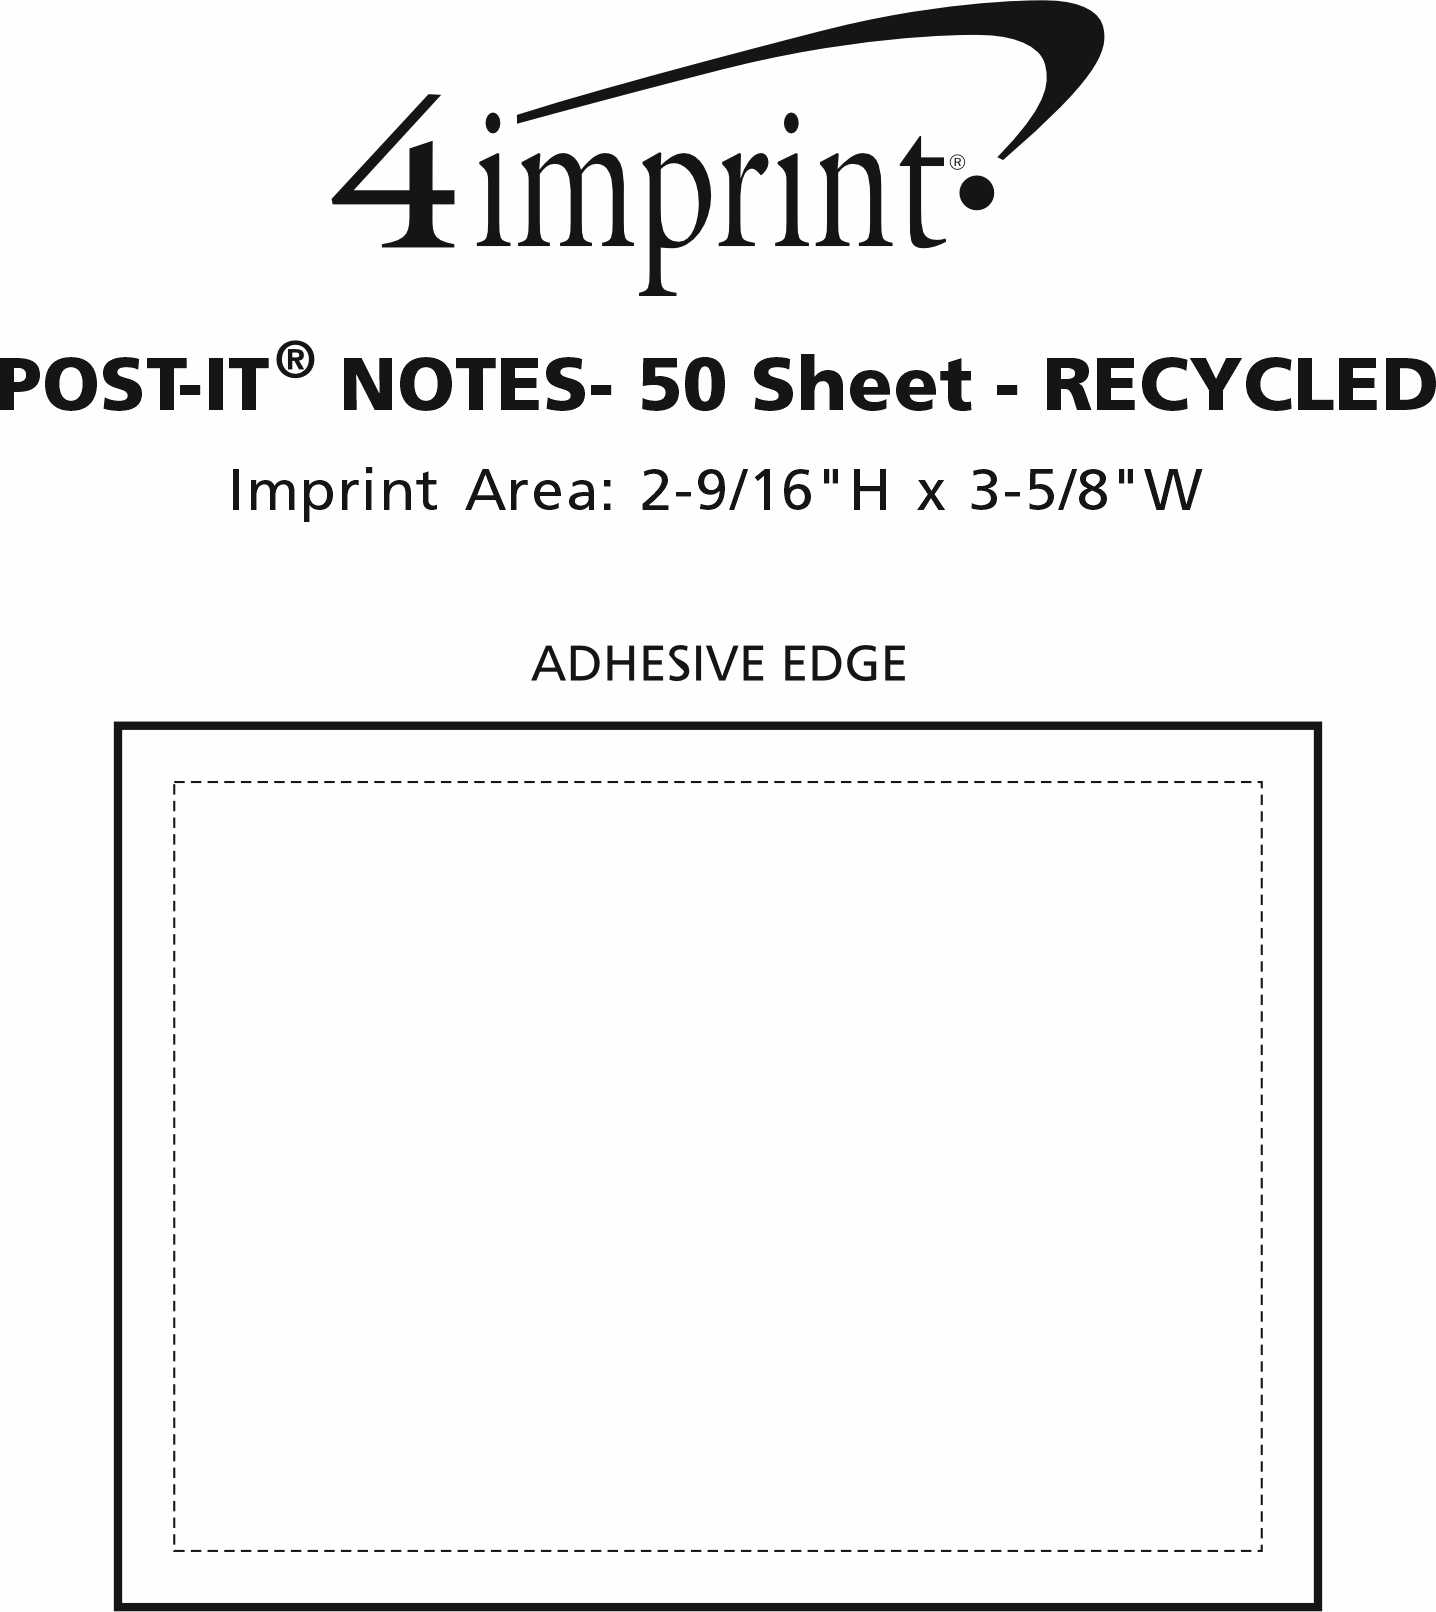 Imprint Area of Post-it® Notes - 3" x 4" - 50 Sheet - Recycled